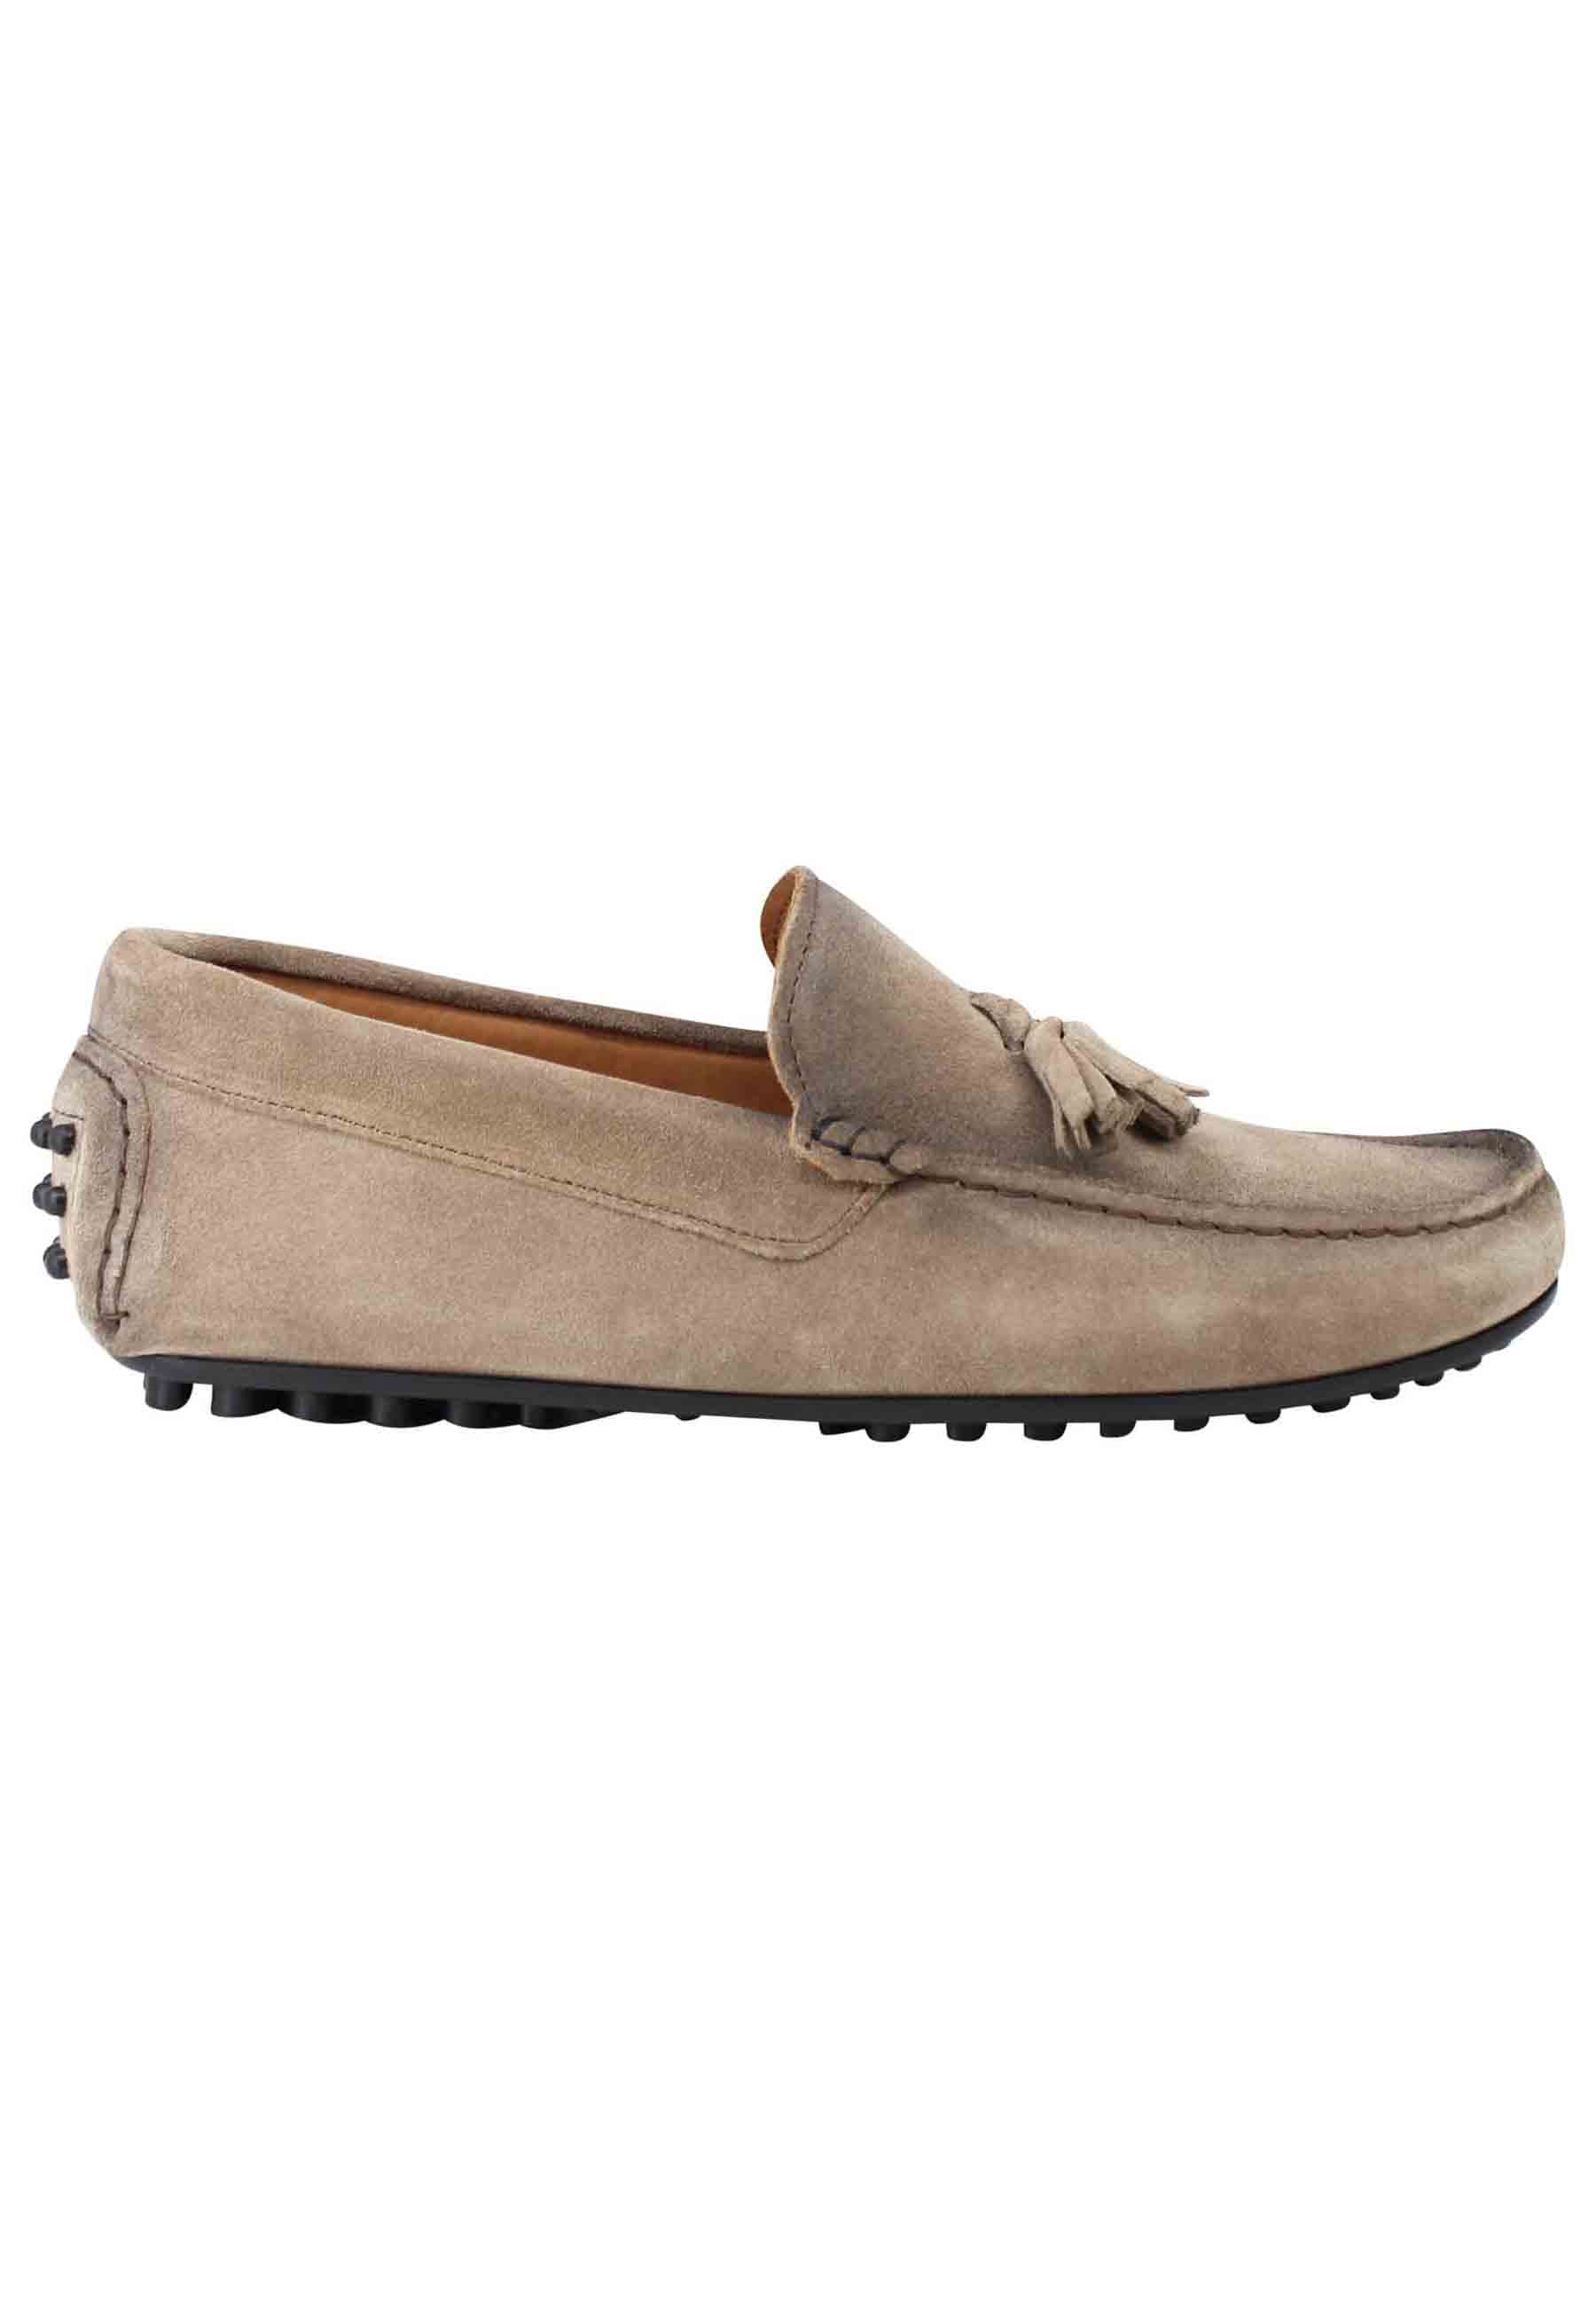 Men's moccasins in gray greased suede with rubber sole